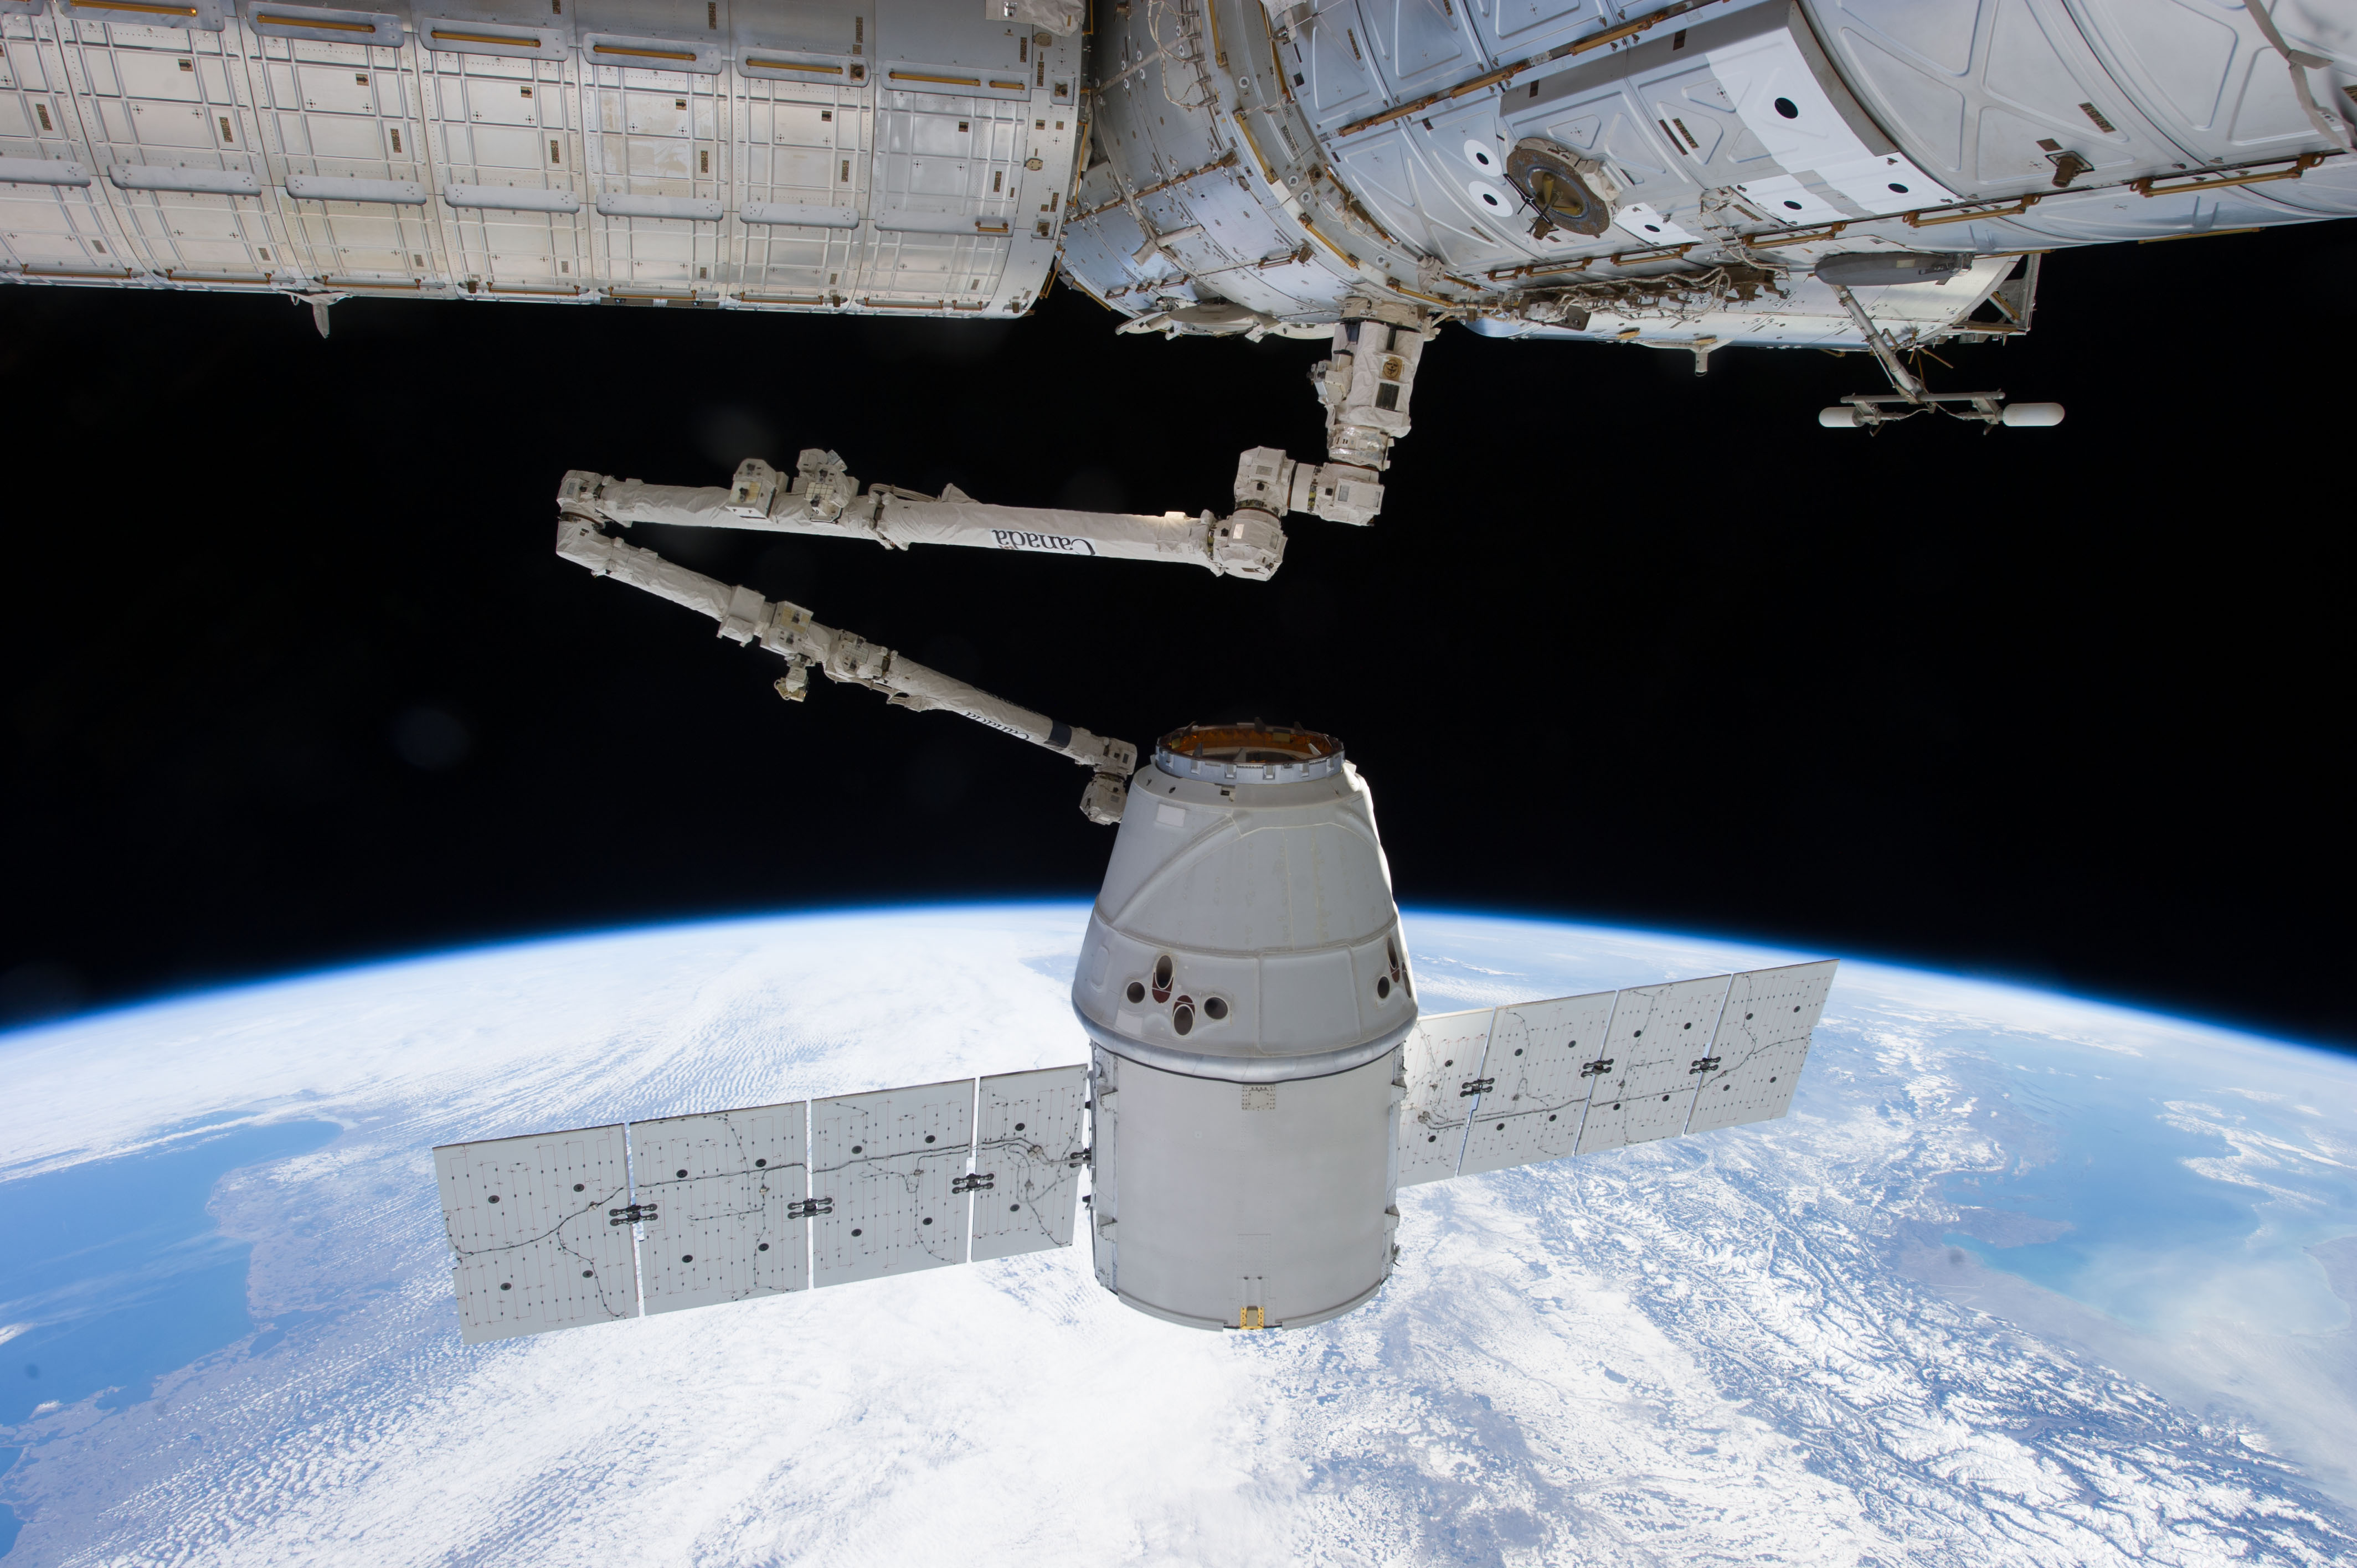 Dragon capsule docking with space station